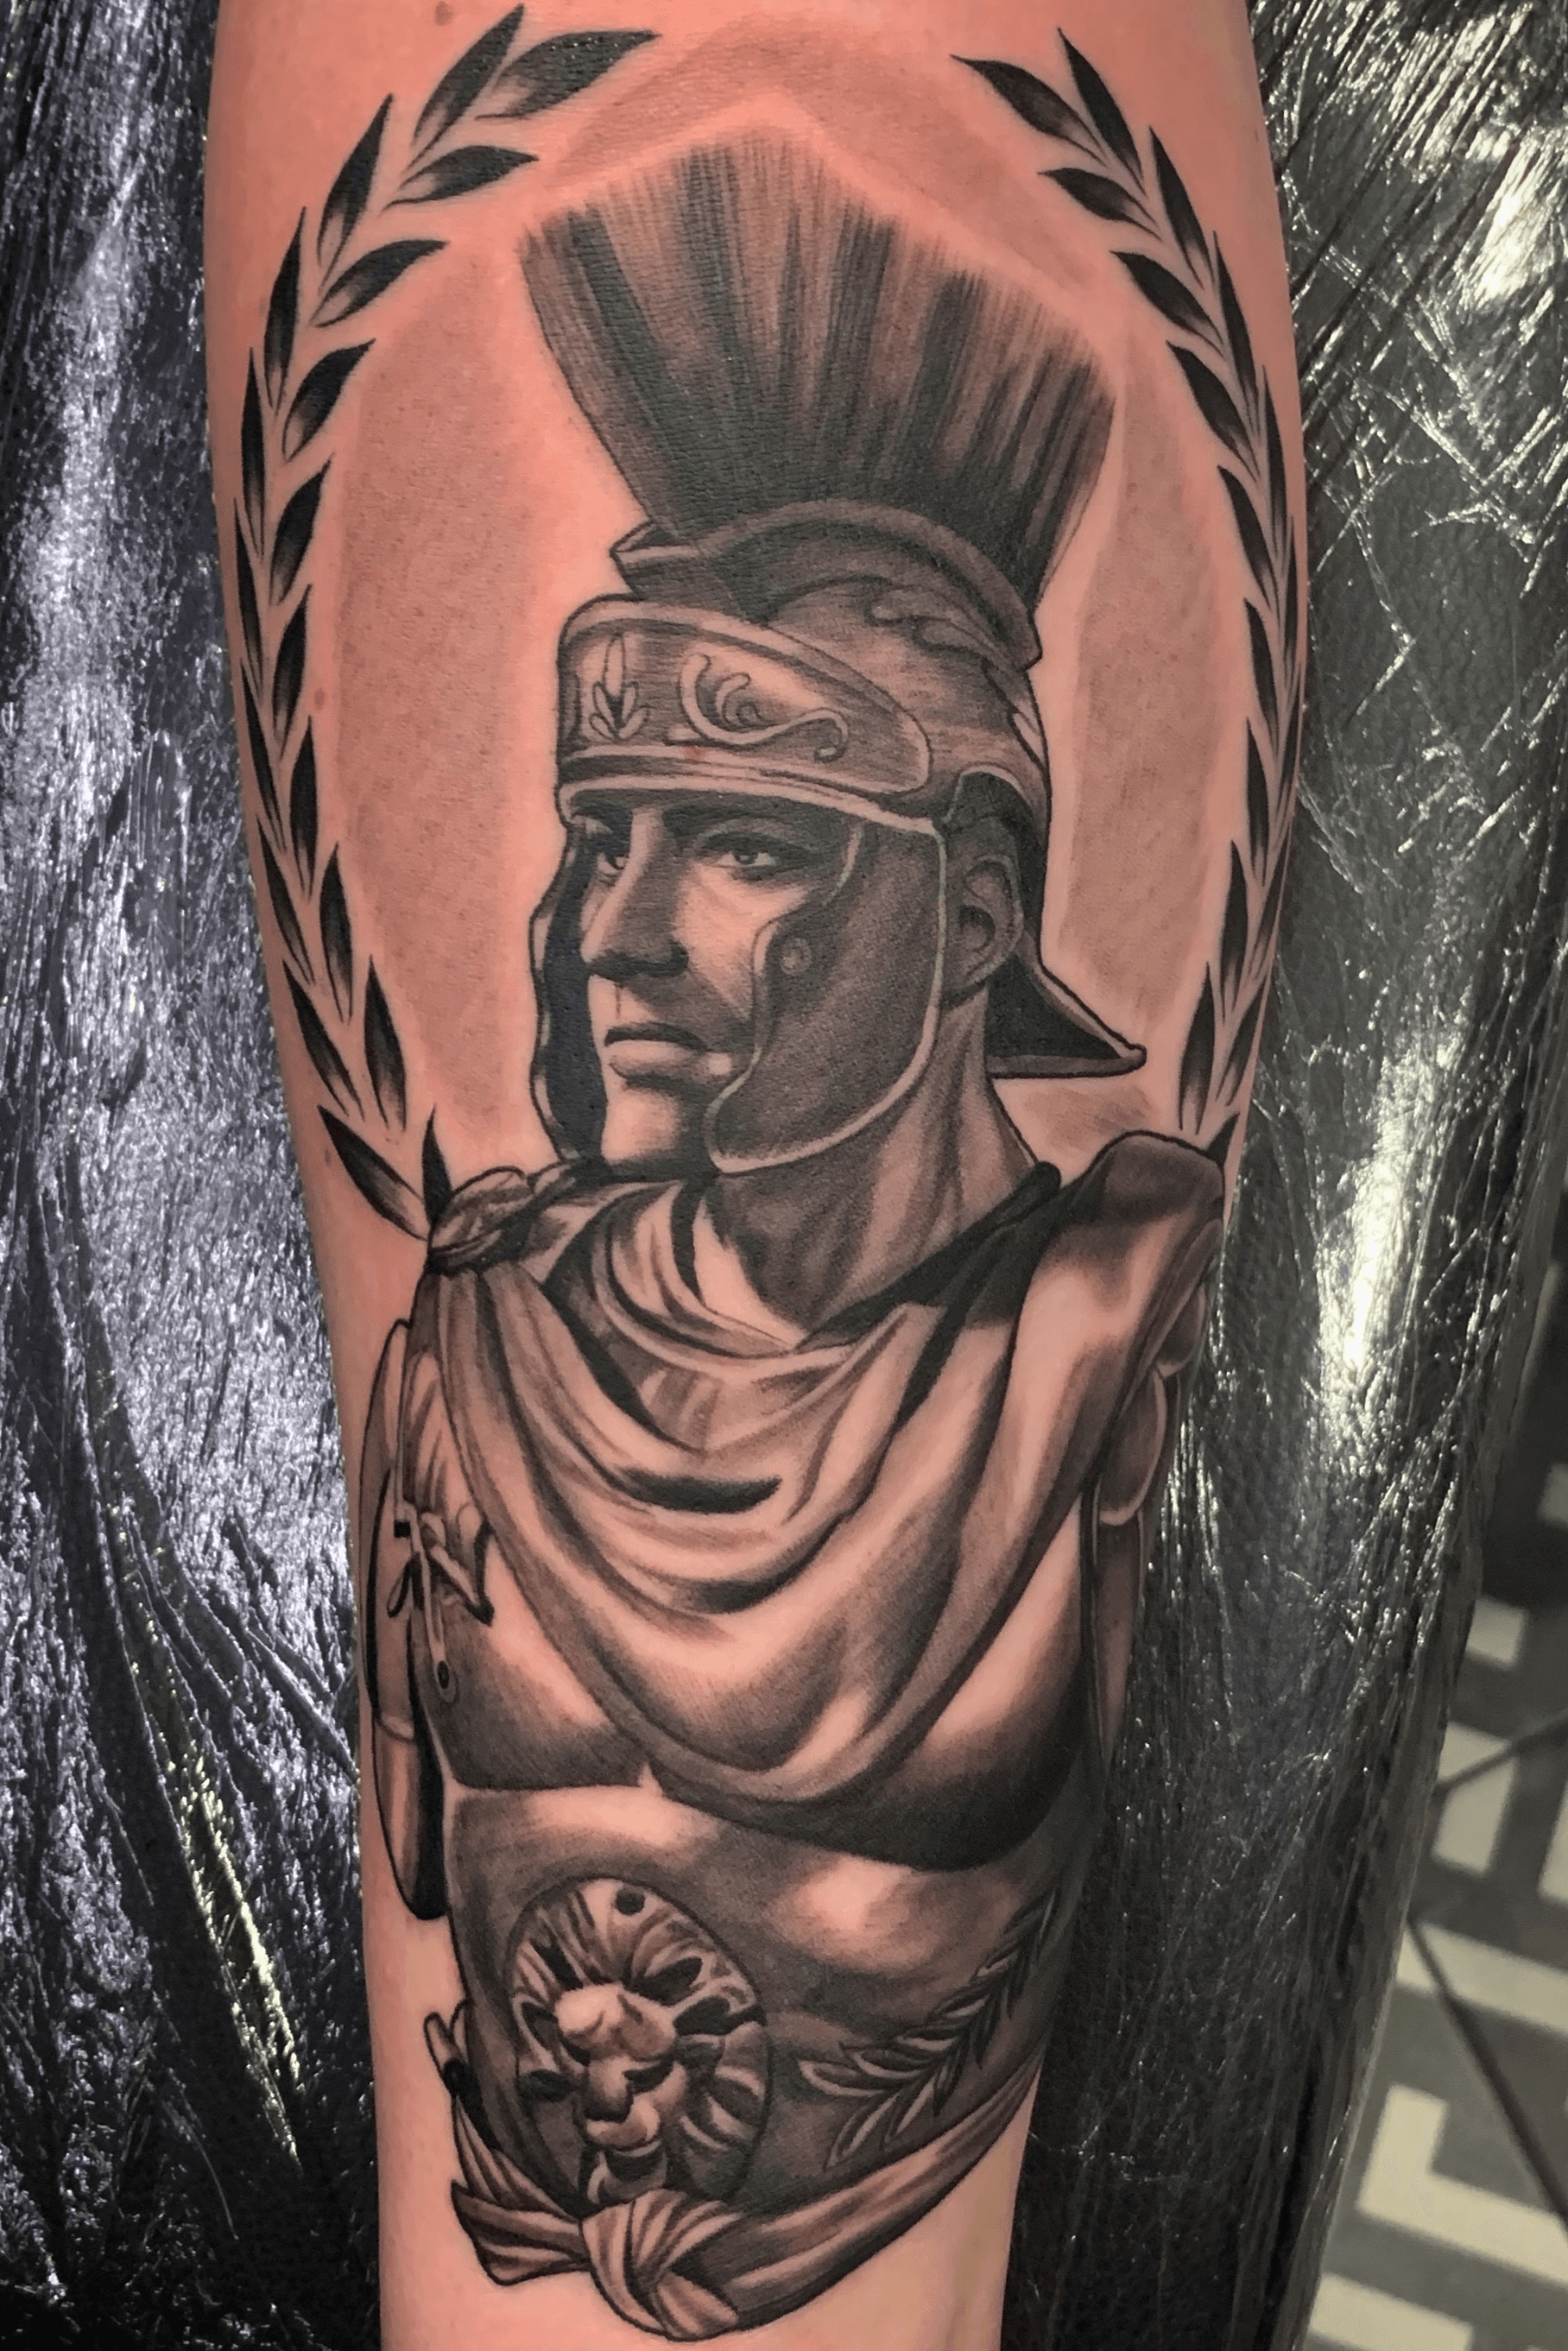 Roman soldier done by hope talbott at Filament Tattoo Co wabash IN  r tattoos